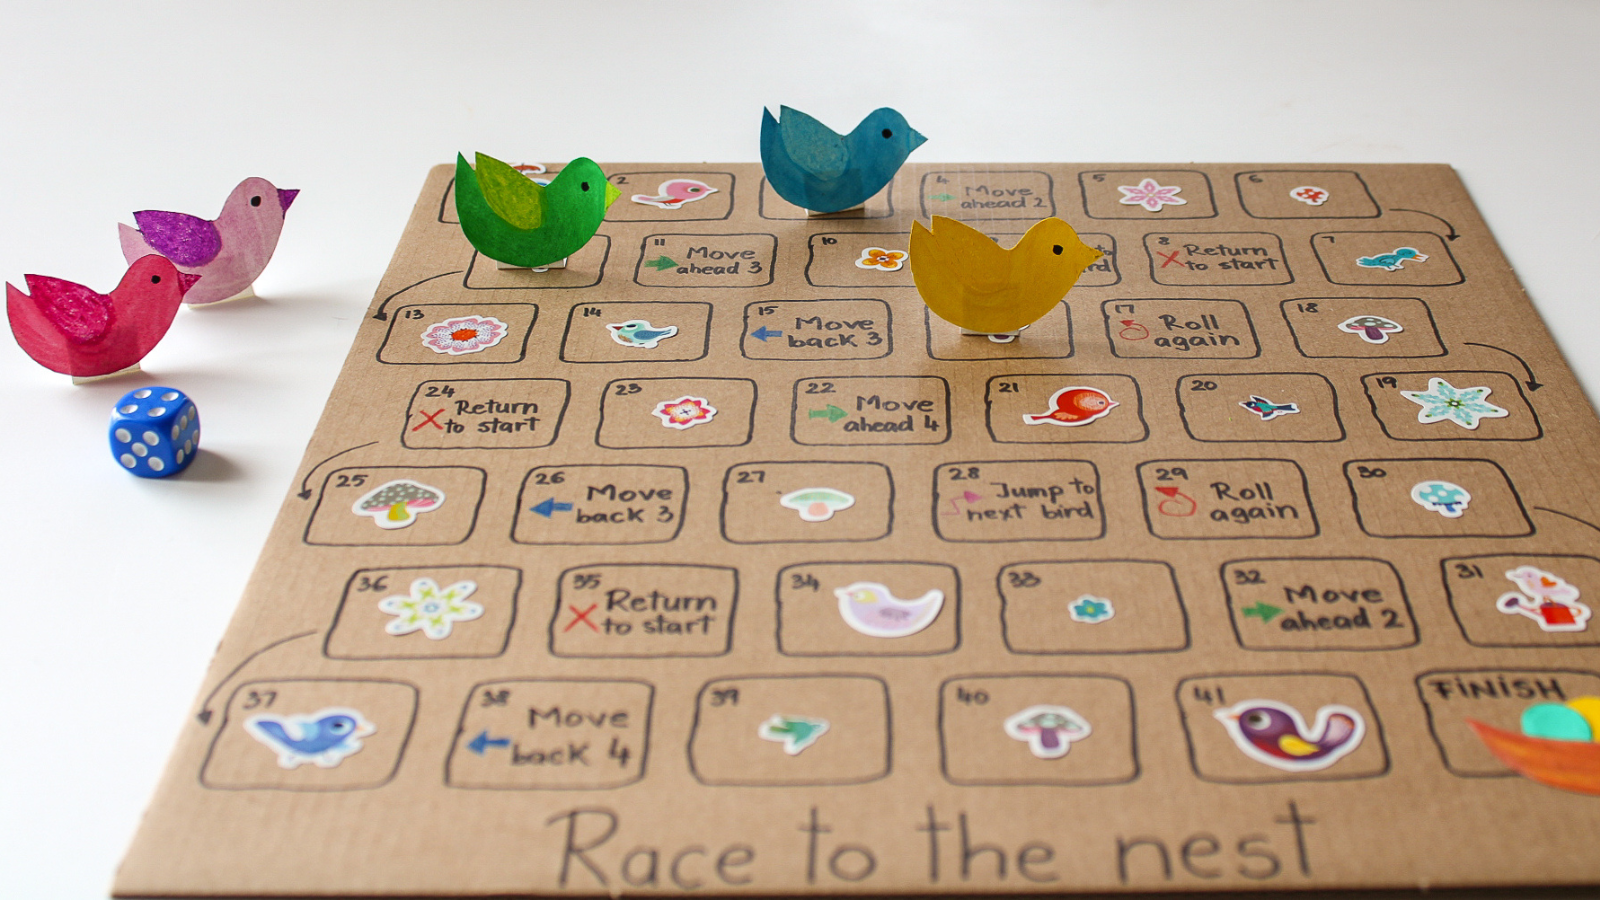 Race to the nest game